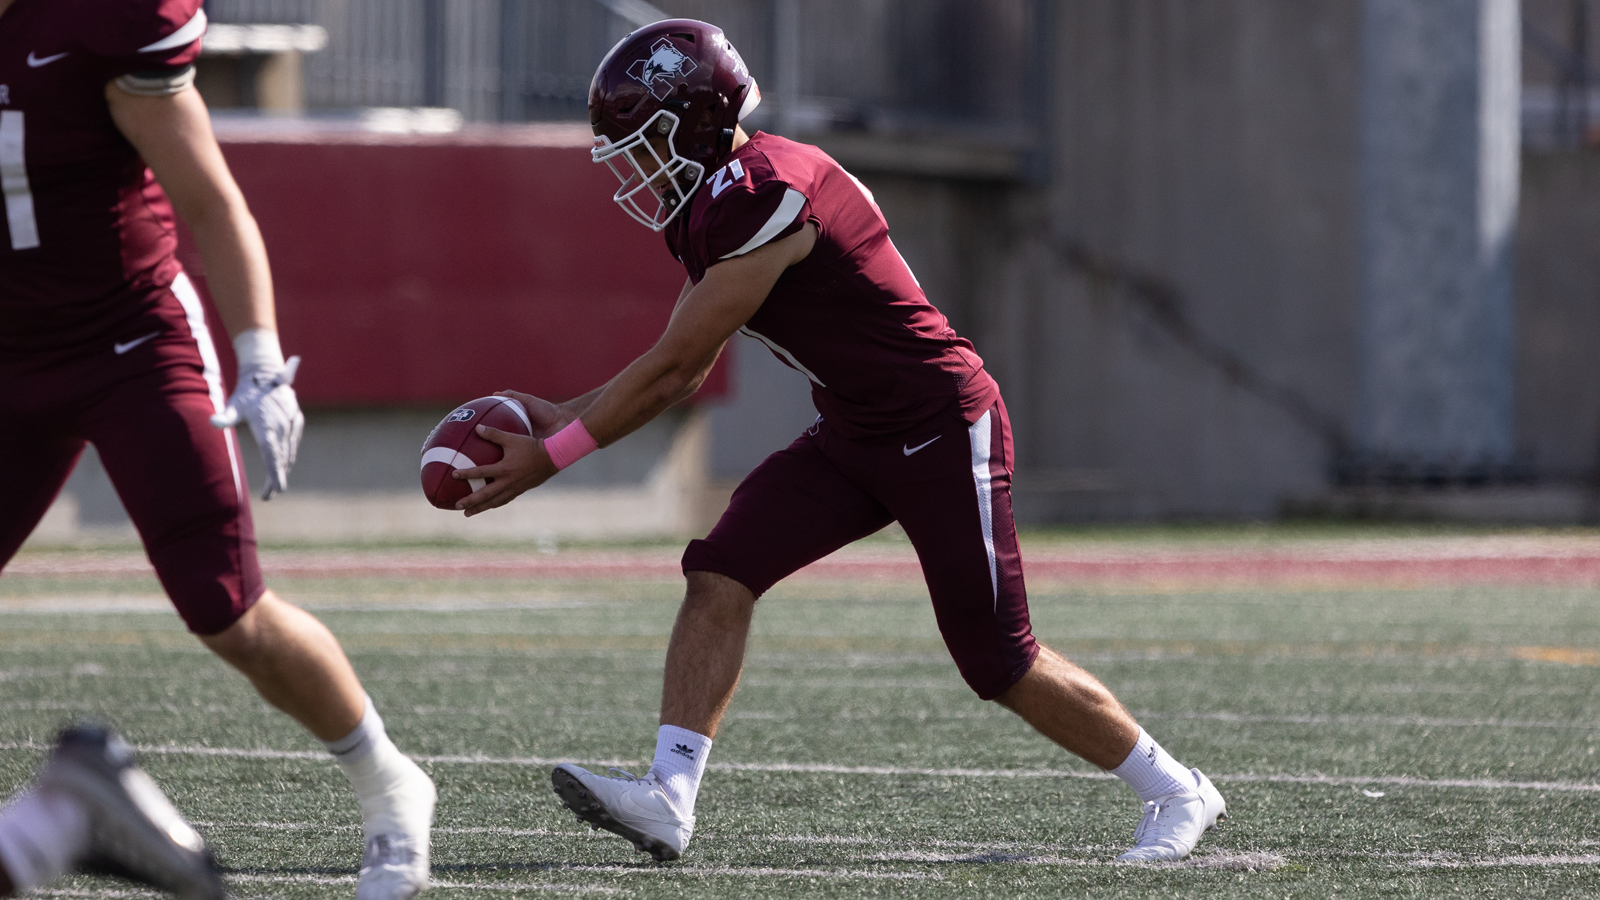 Action photo of McMaster kicked Luca Pante holding the ball about to punt it during a game